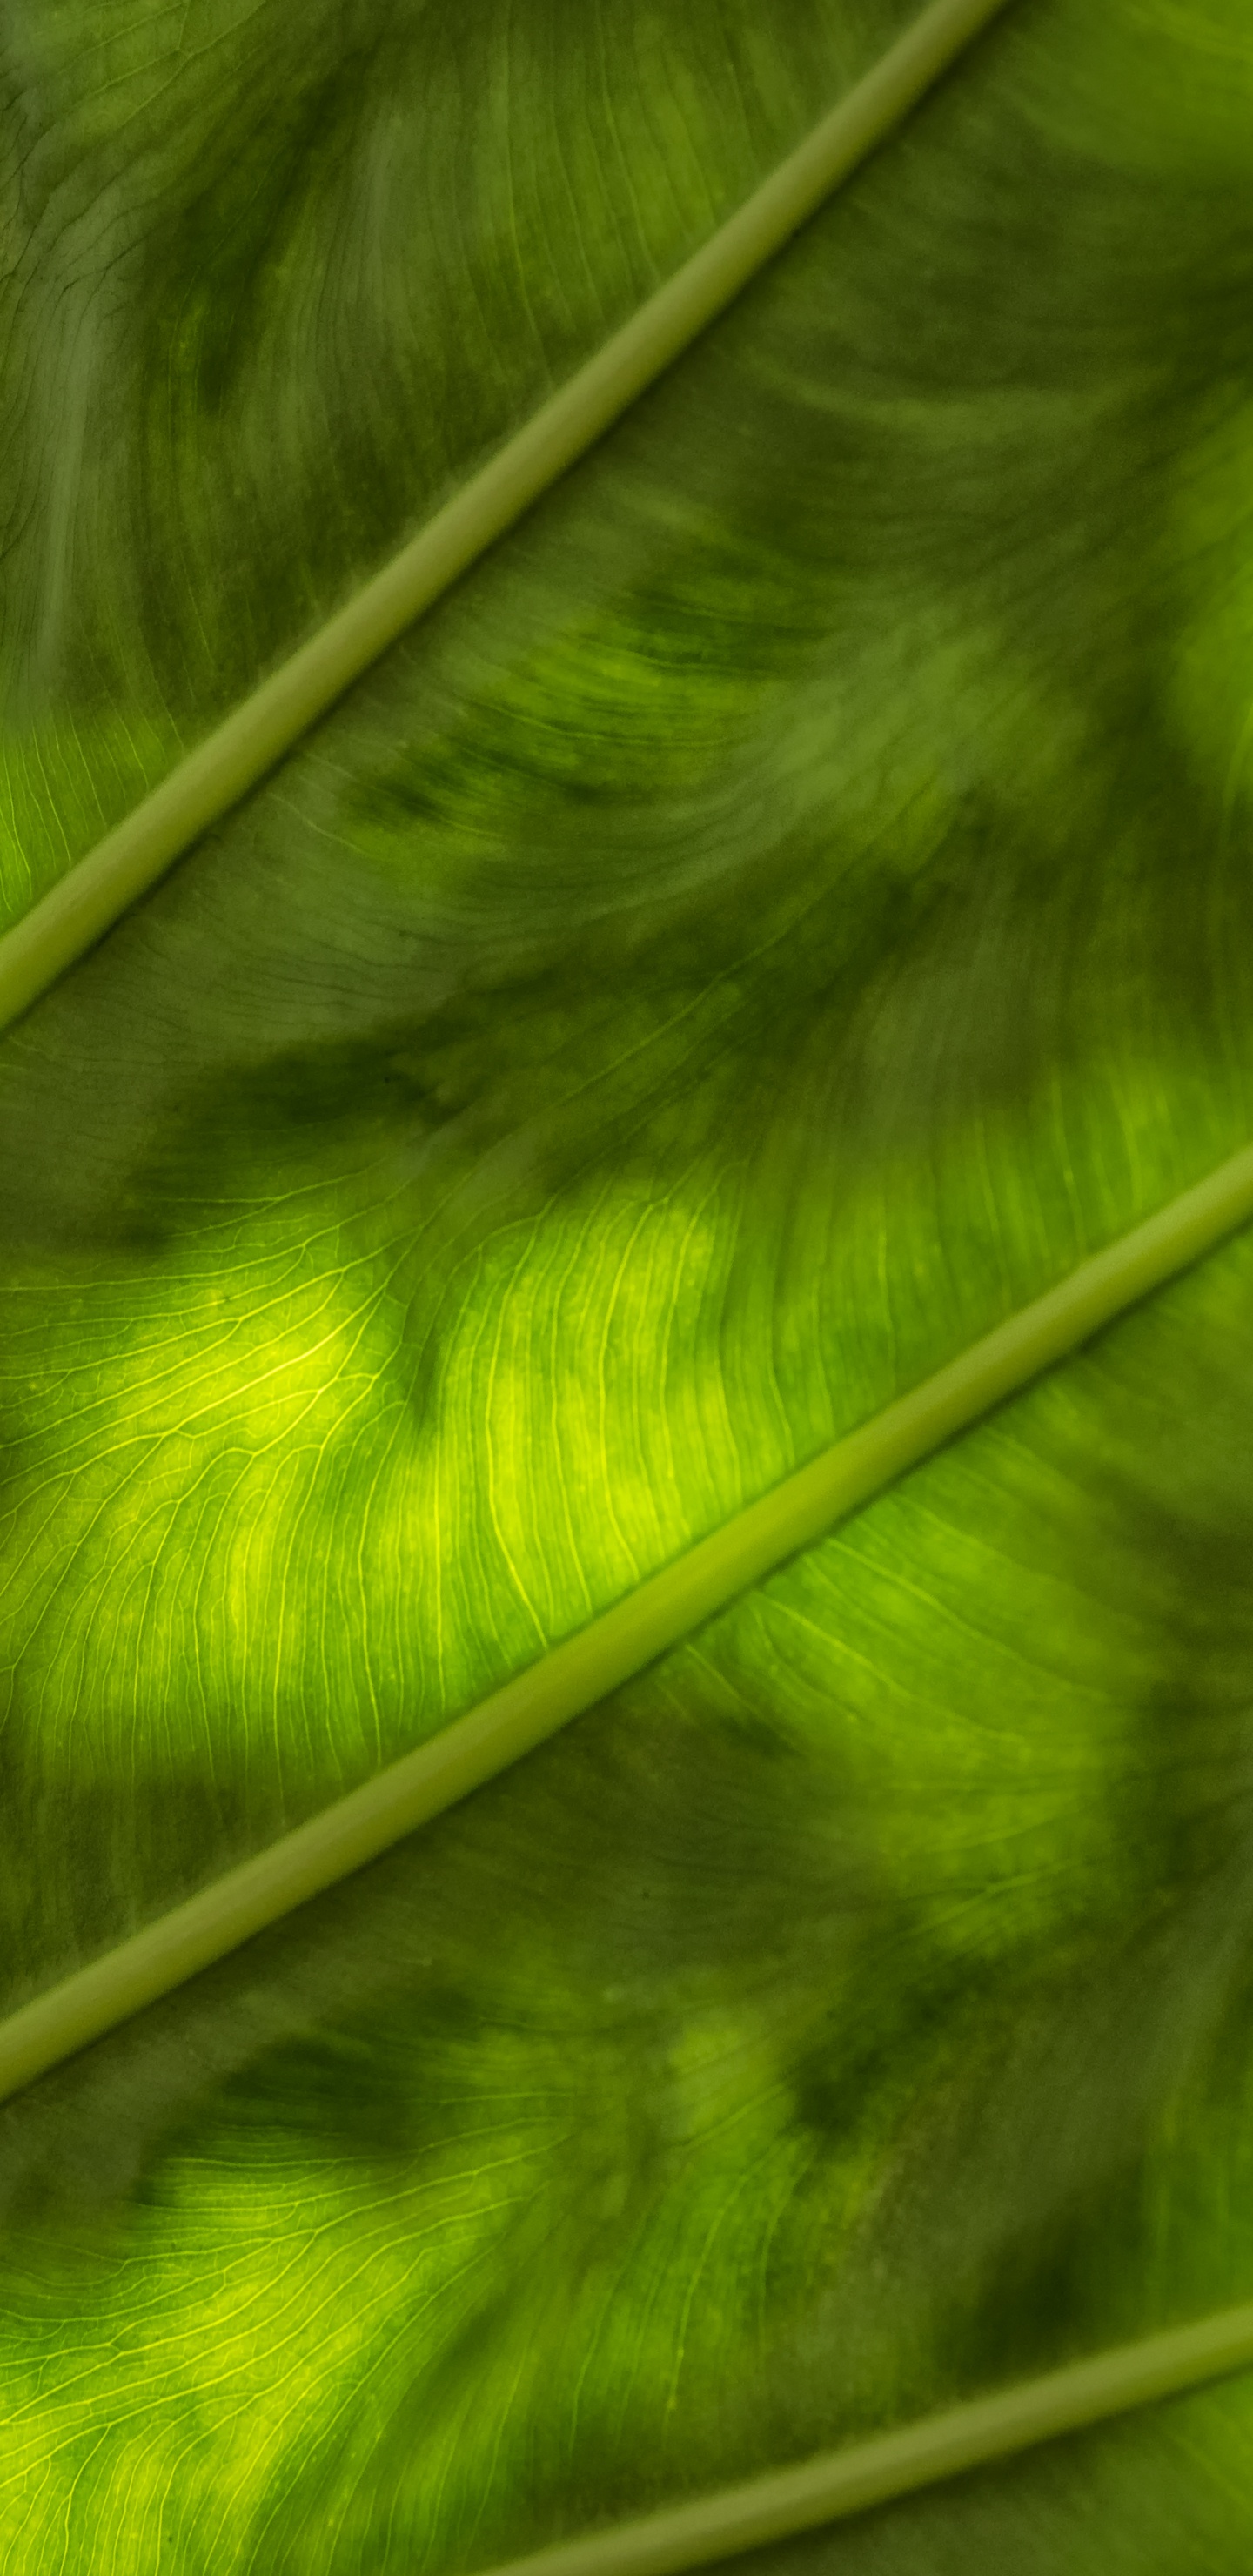 Green and White Stripe Textile. Wallpaper in 1440x2960 Resolution